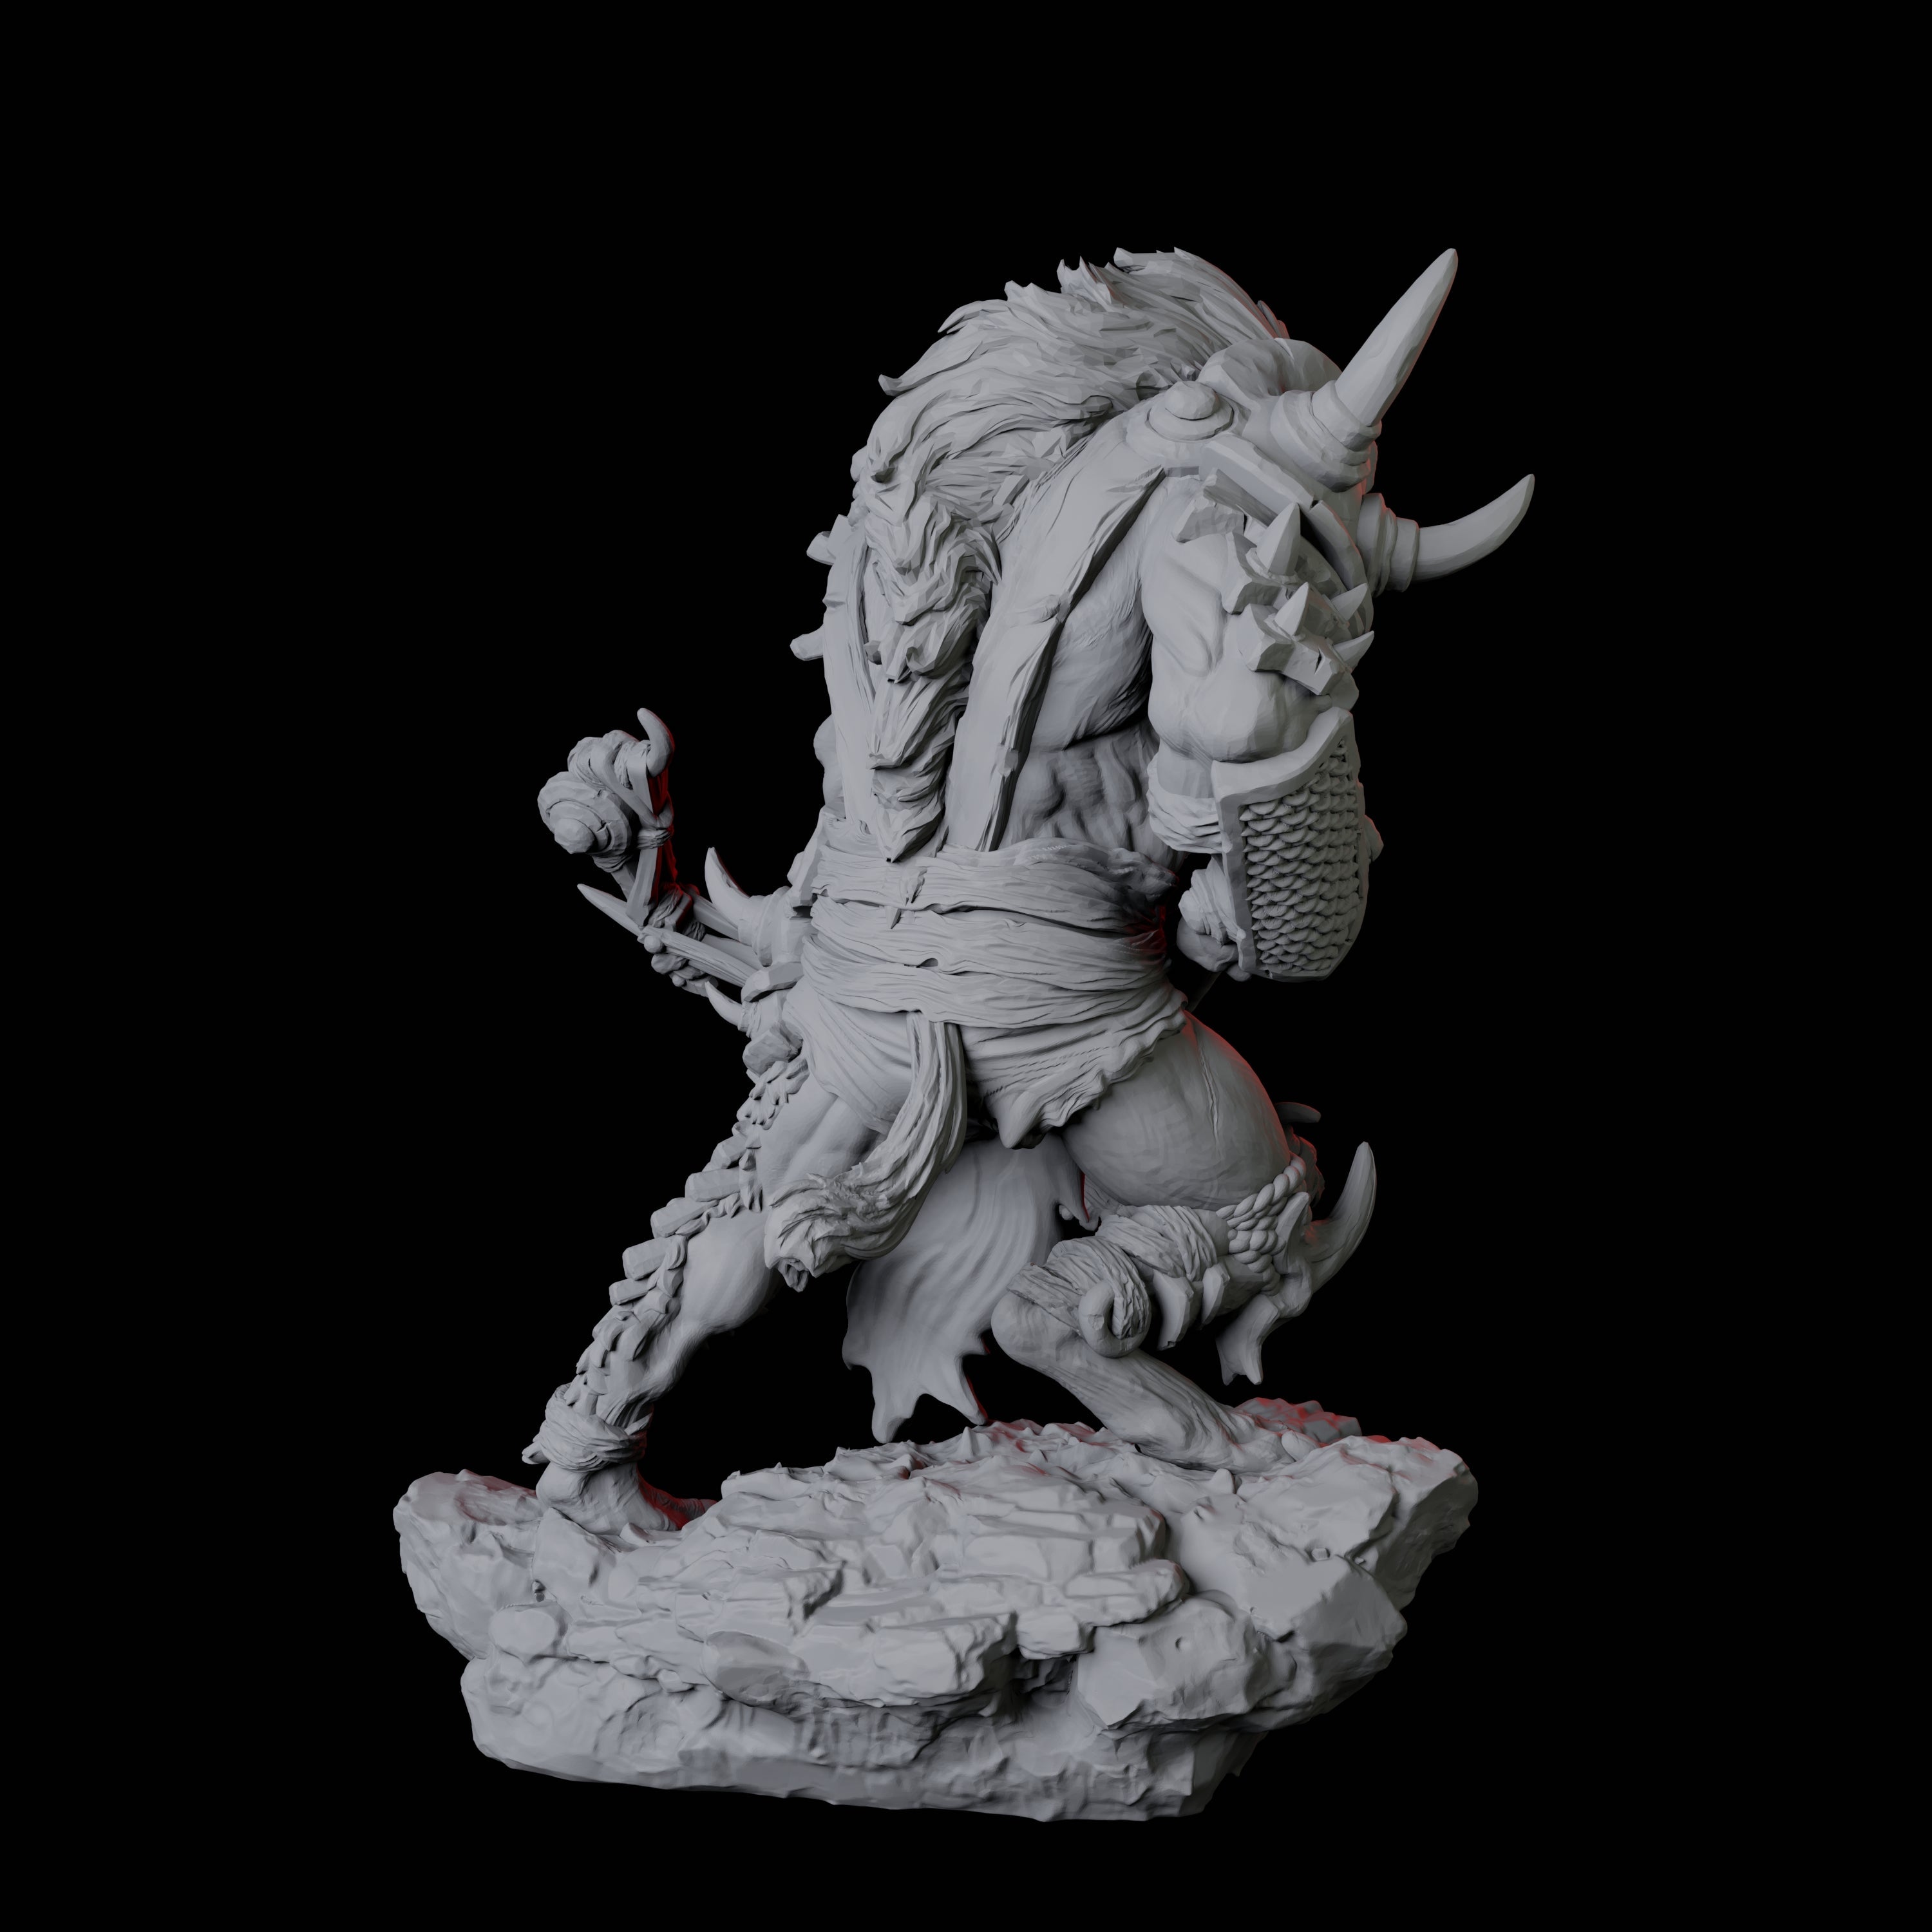 Gnoll Scout C Miniature for Dungeons and Dragons, Pathfinder or other TTRPGs